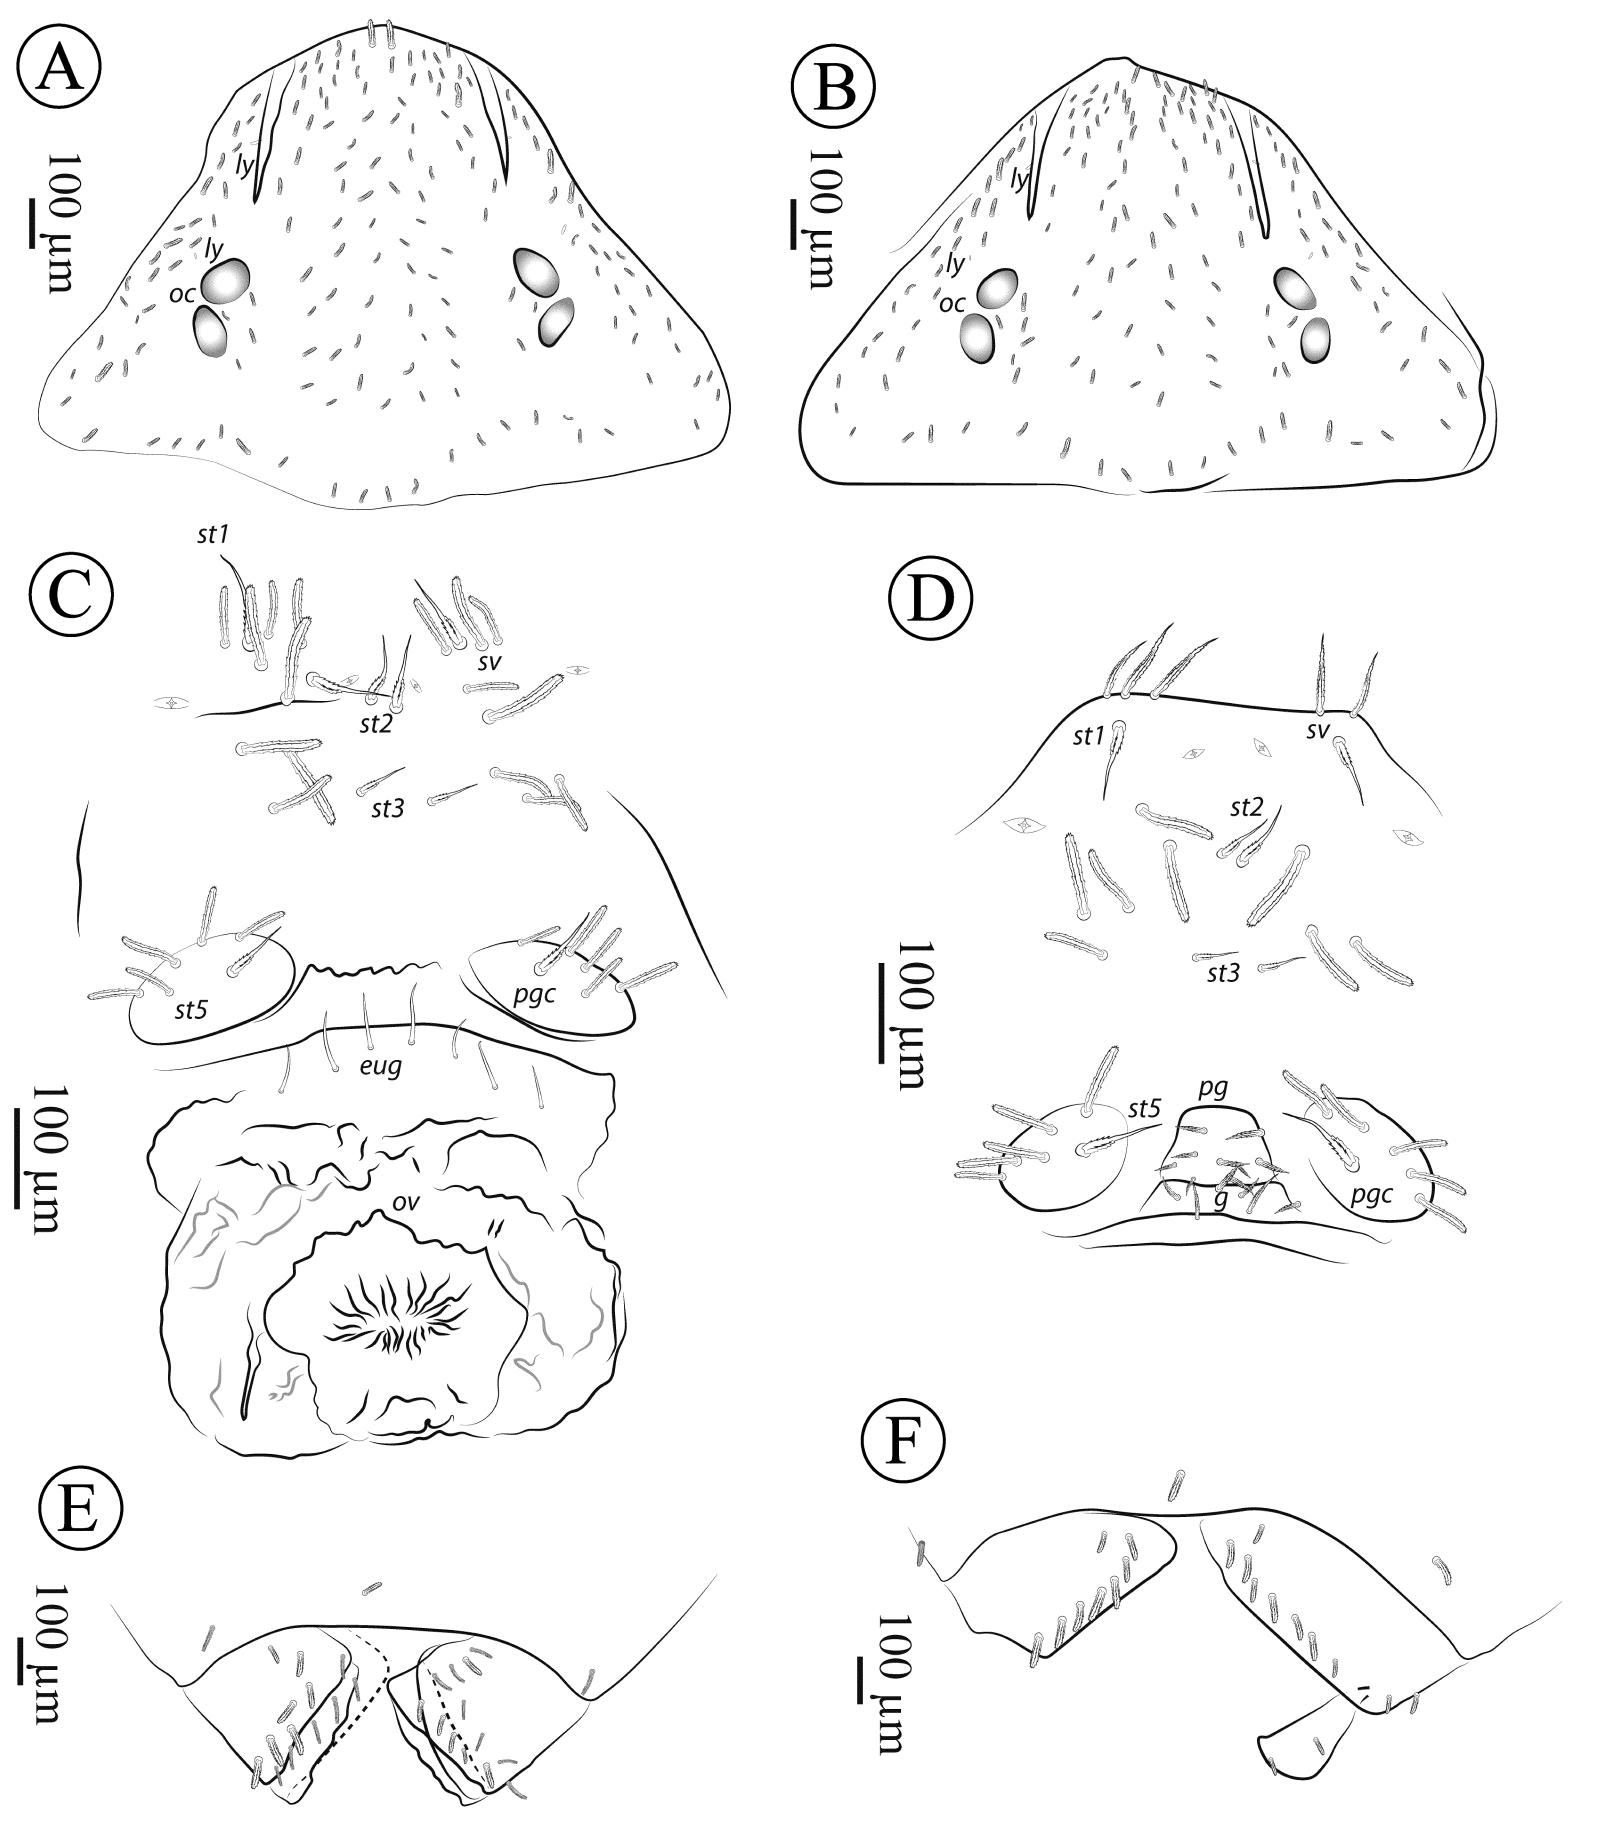 Neocarus spelaion sp. n. (Parasitiformes, Opilioacaridae), a new species of  cave dwelling Neocarus from Minas Gerais state, Brazil